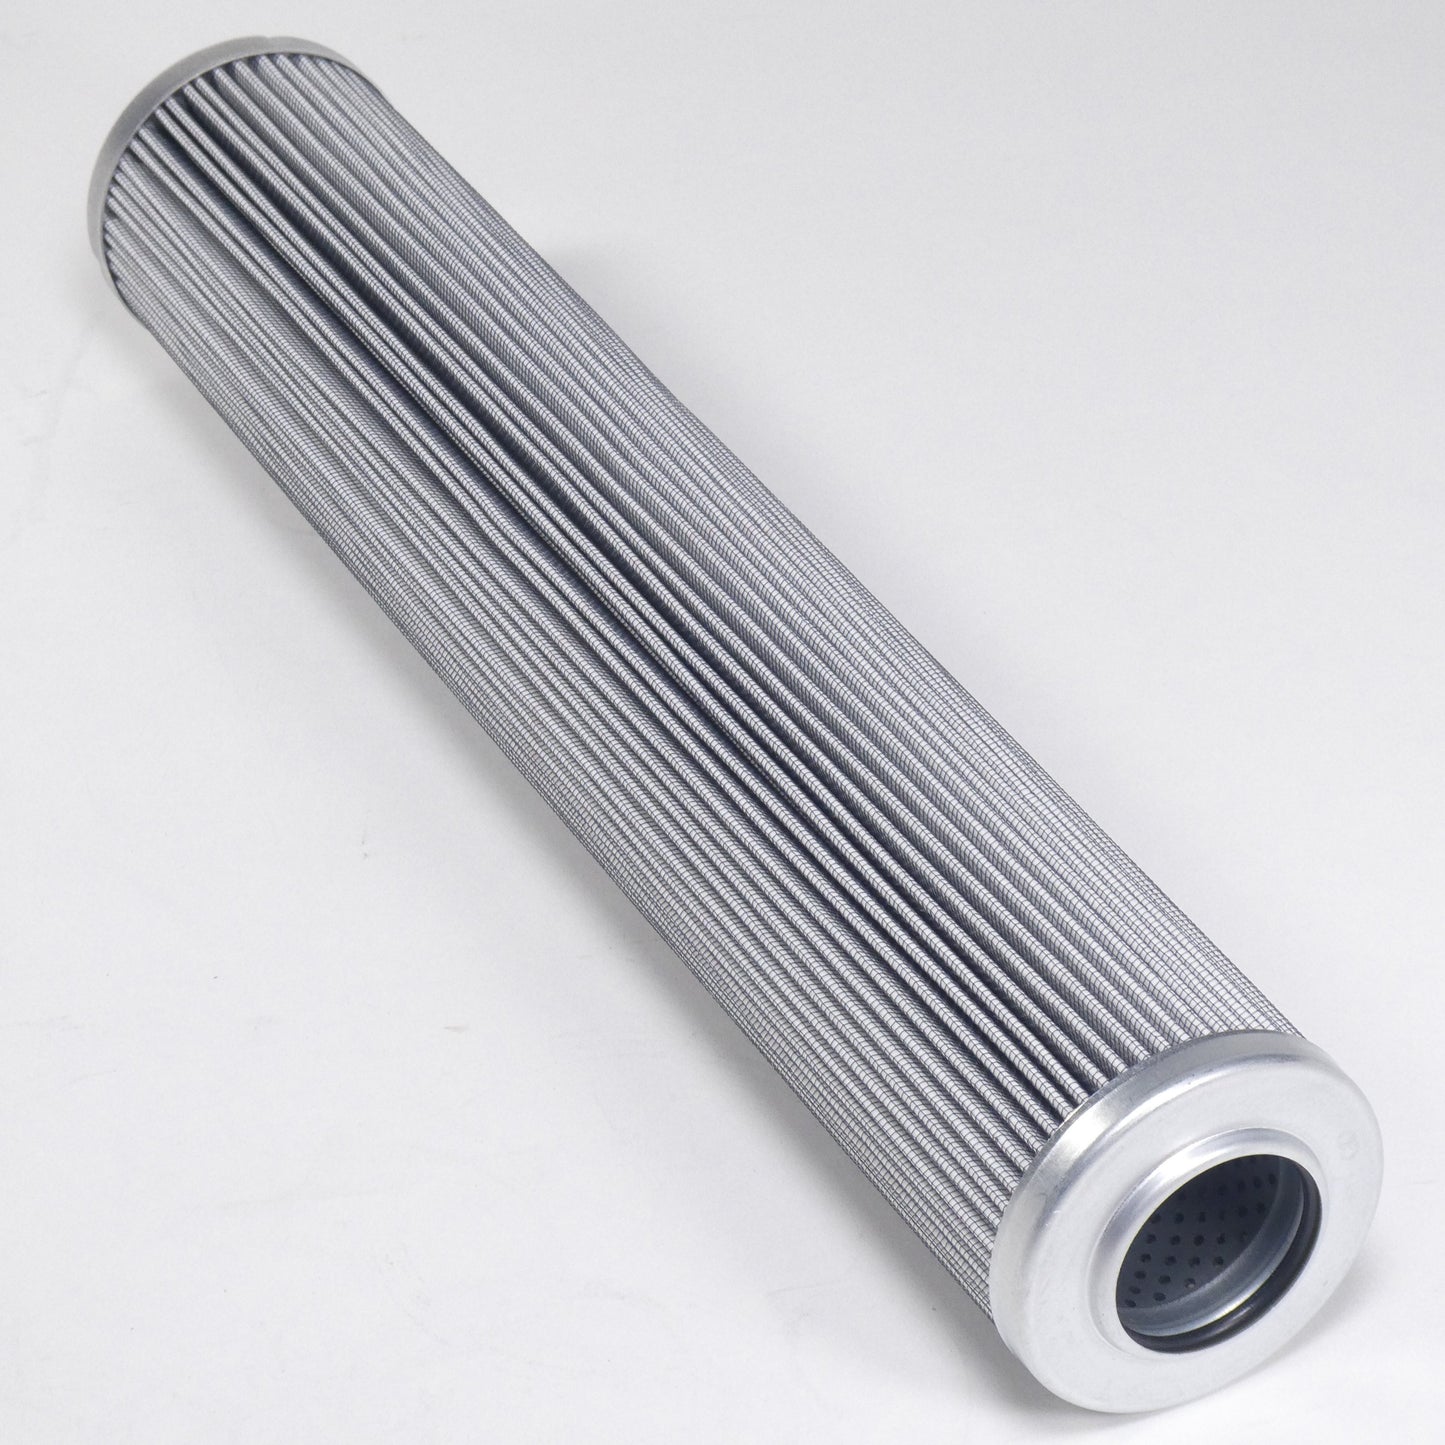 Hydrafil Replacement Filter Element for Kaydon KM9600-16-3